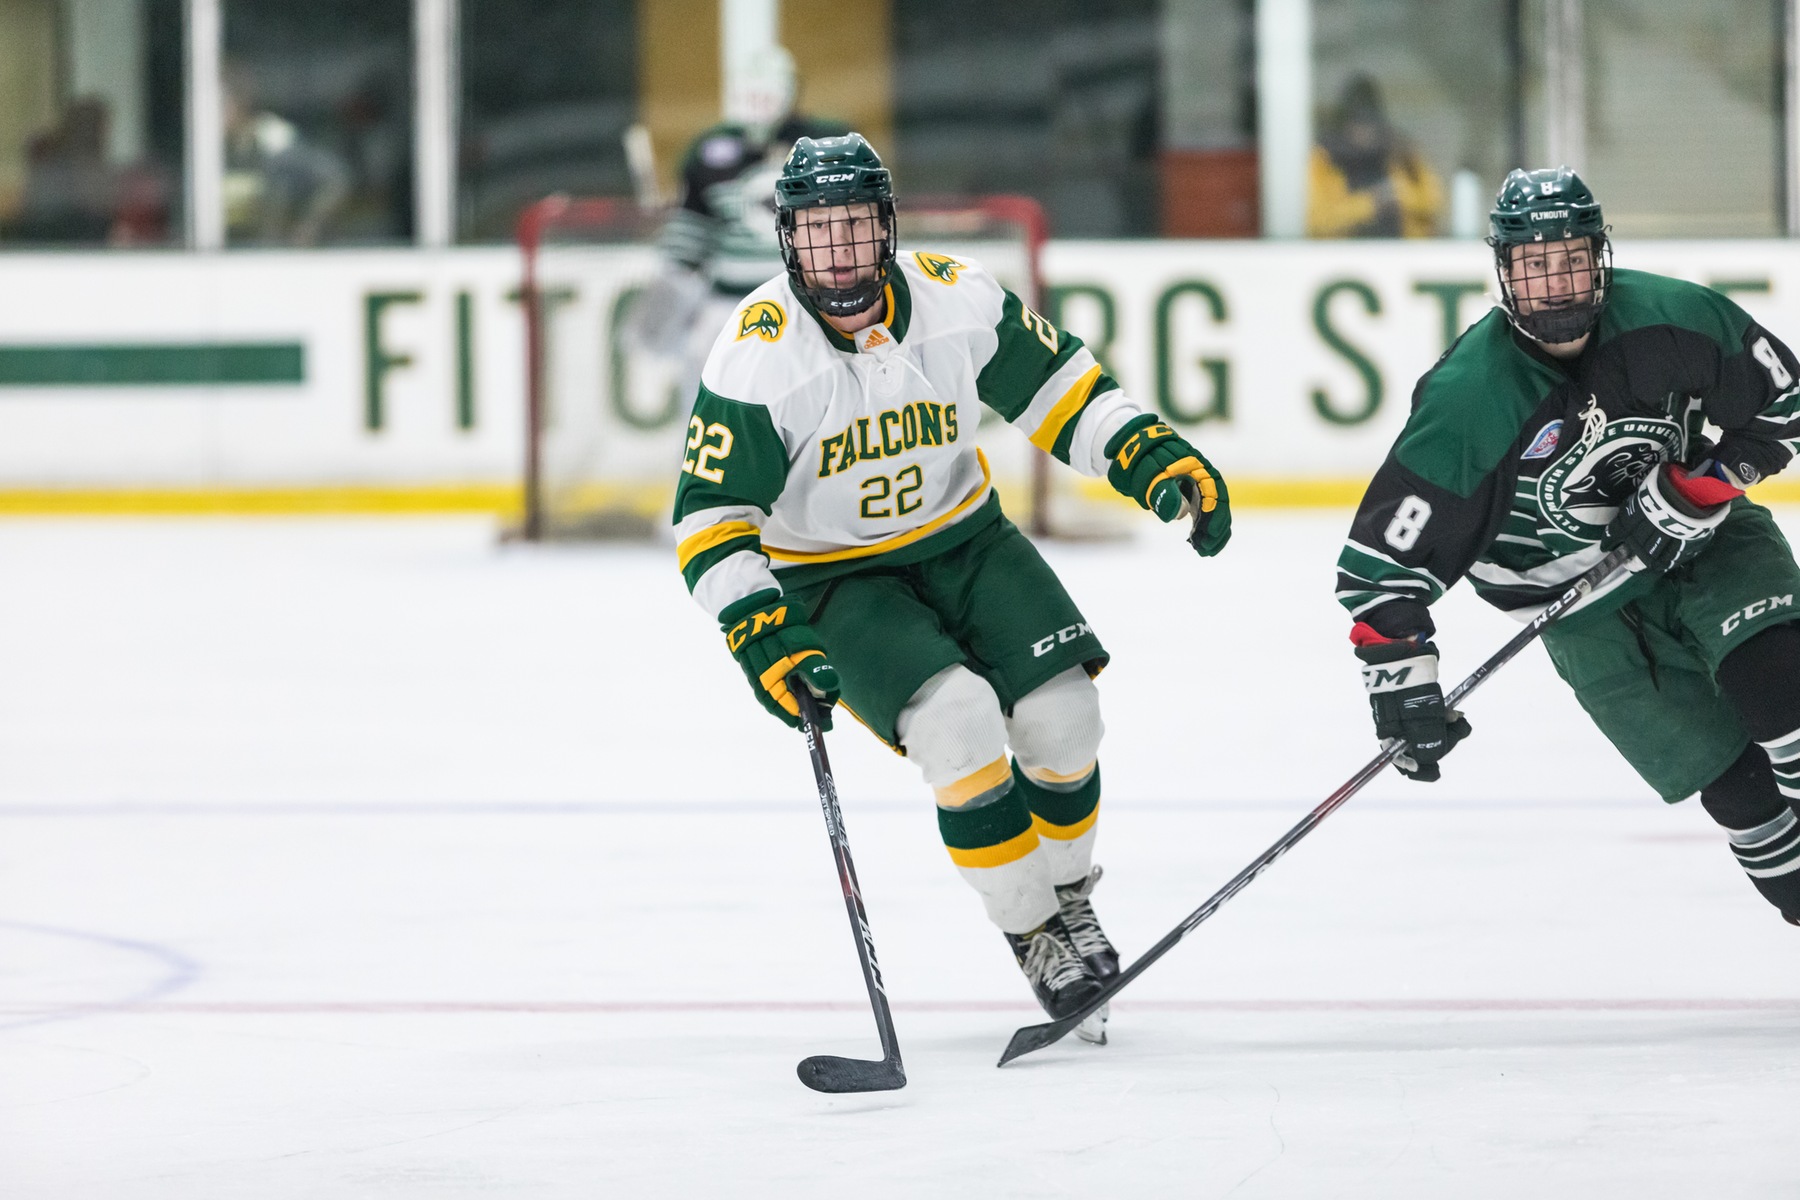 Fitchburg State Clipped By Albertus Magnus, 3-2 In Overtime